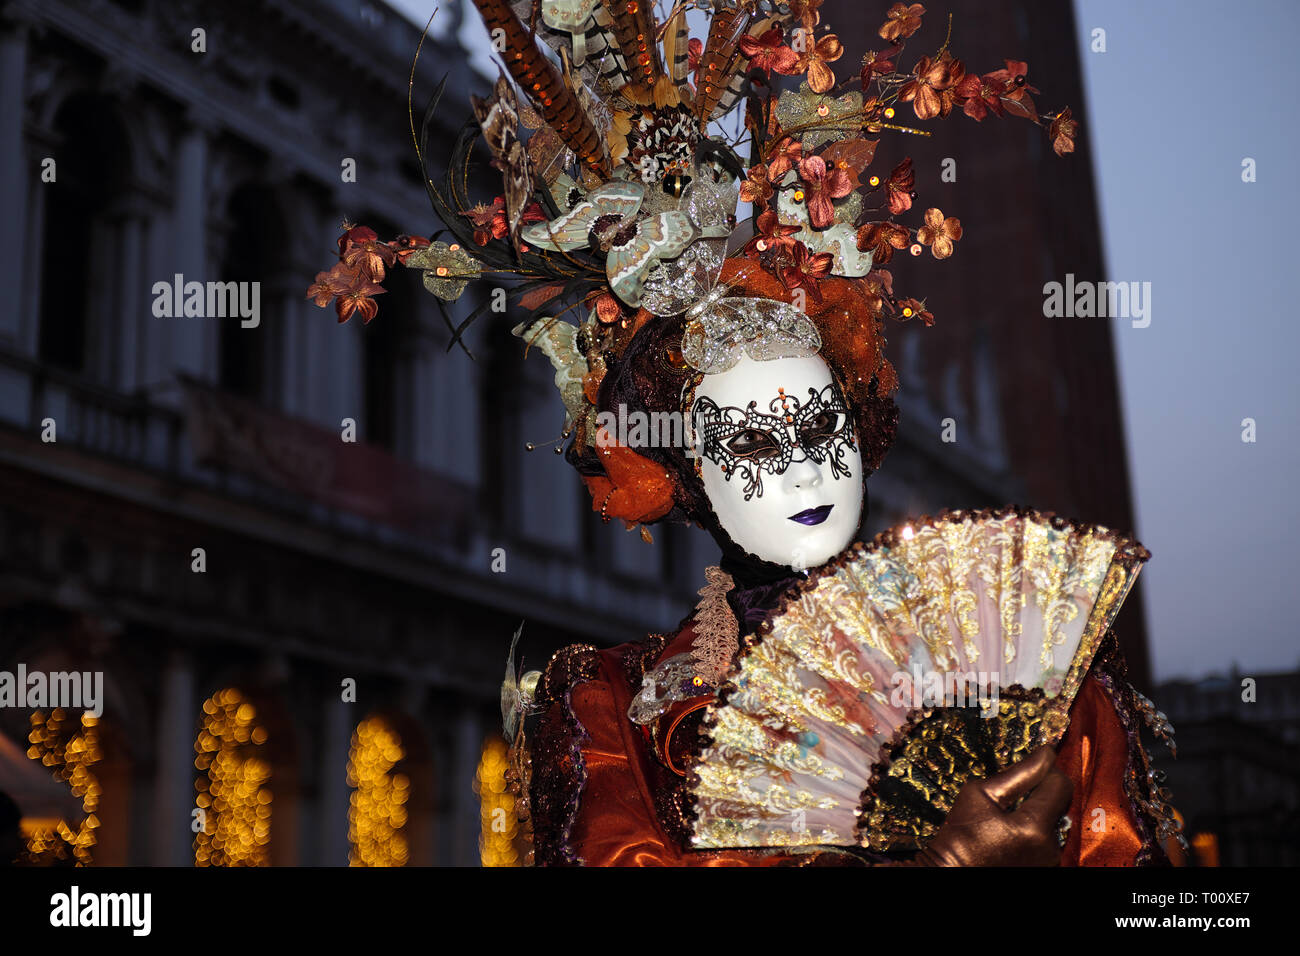 Woman dressed in traditional mask and costume for Venice Carnival standing in Piazza San Marco in front of Saint Mark's Basilica, Venice, Veneto, Ital Stock Photo